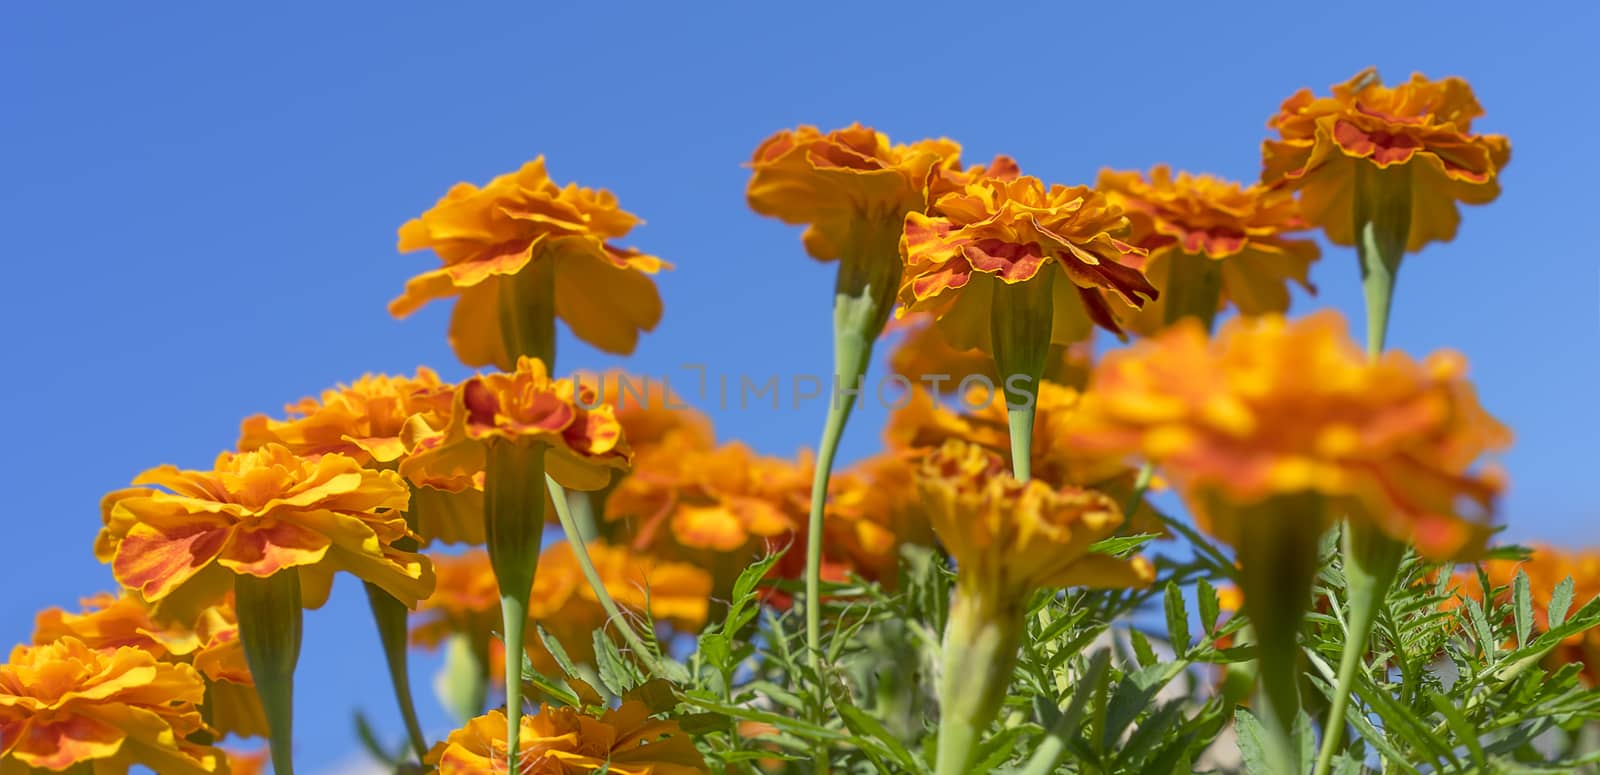 Bright colorful French marigolds against blue sky Autumn panoram by sherj